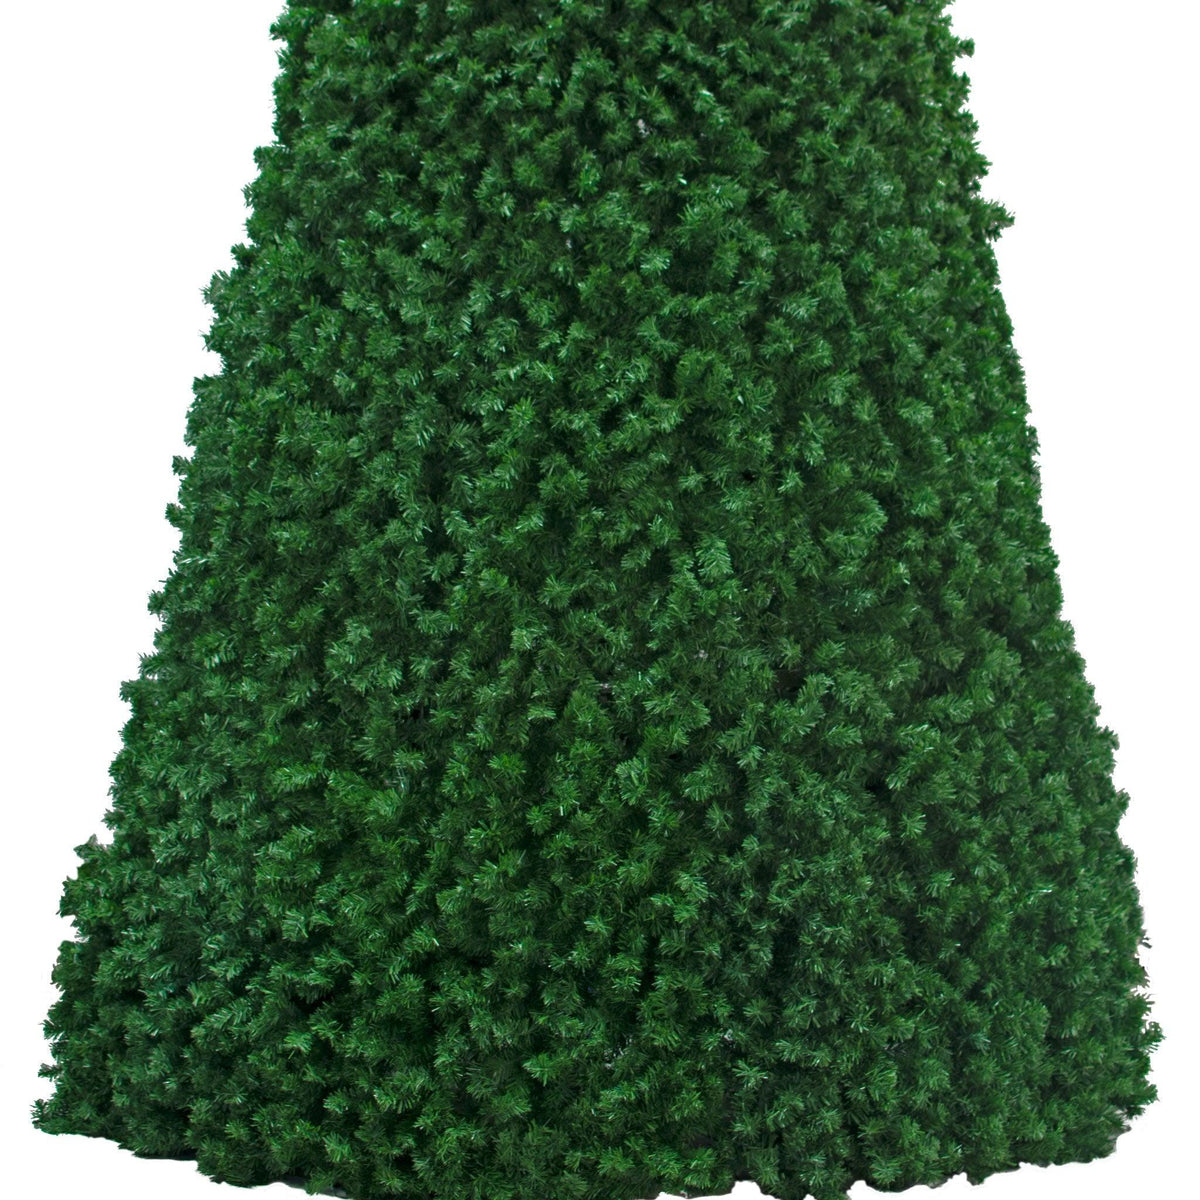 Lee Display's 16FT Commercial Artificial PVC Pine Fir Christmas Tree on sale and available for purchase at leedisplay.com